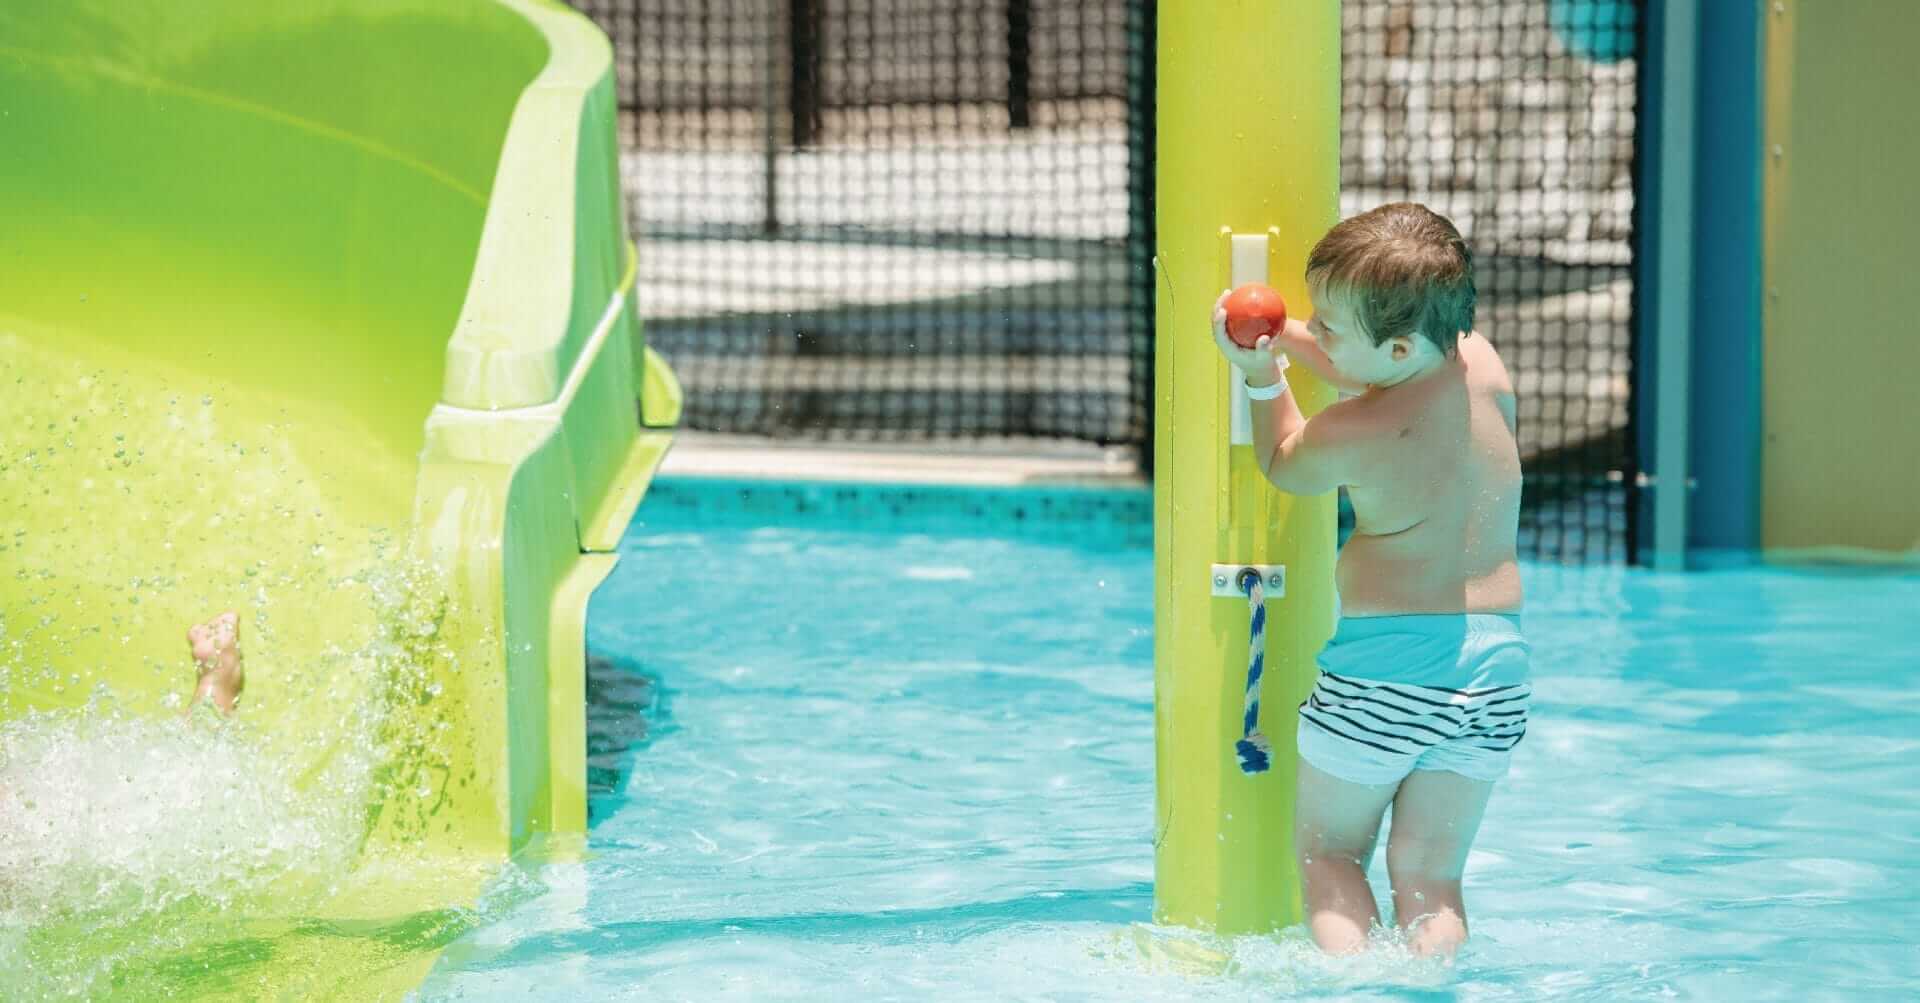 A little boy activates a water play feature pushing up on a lever.